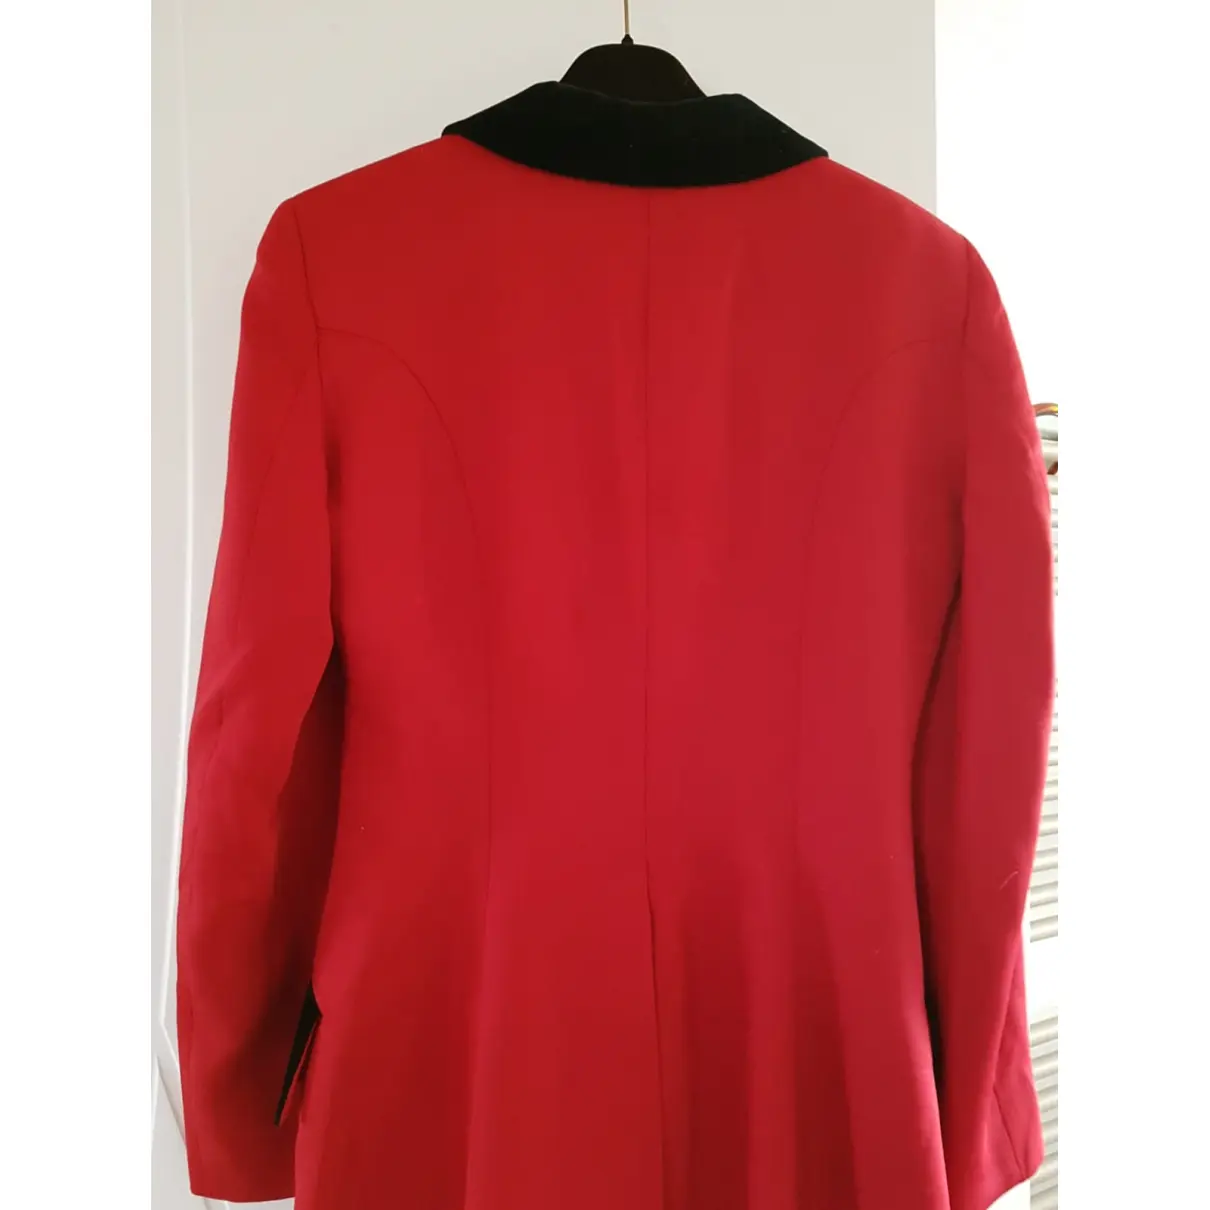 Buy Moschino Cheap And Chic Wool blazer online - Vintage